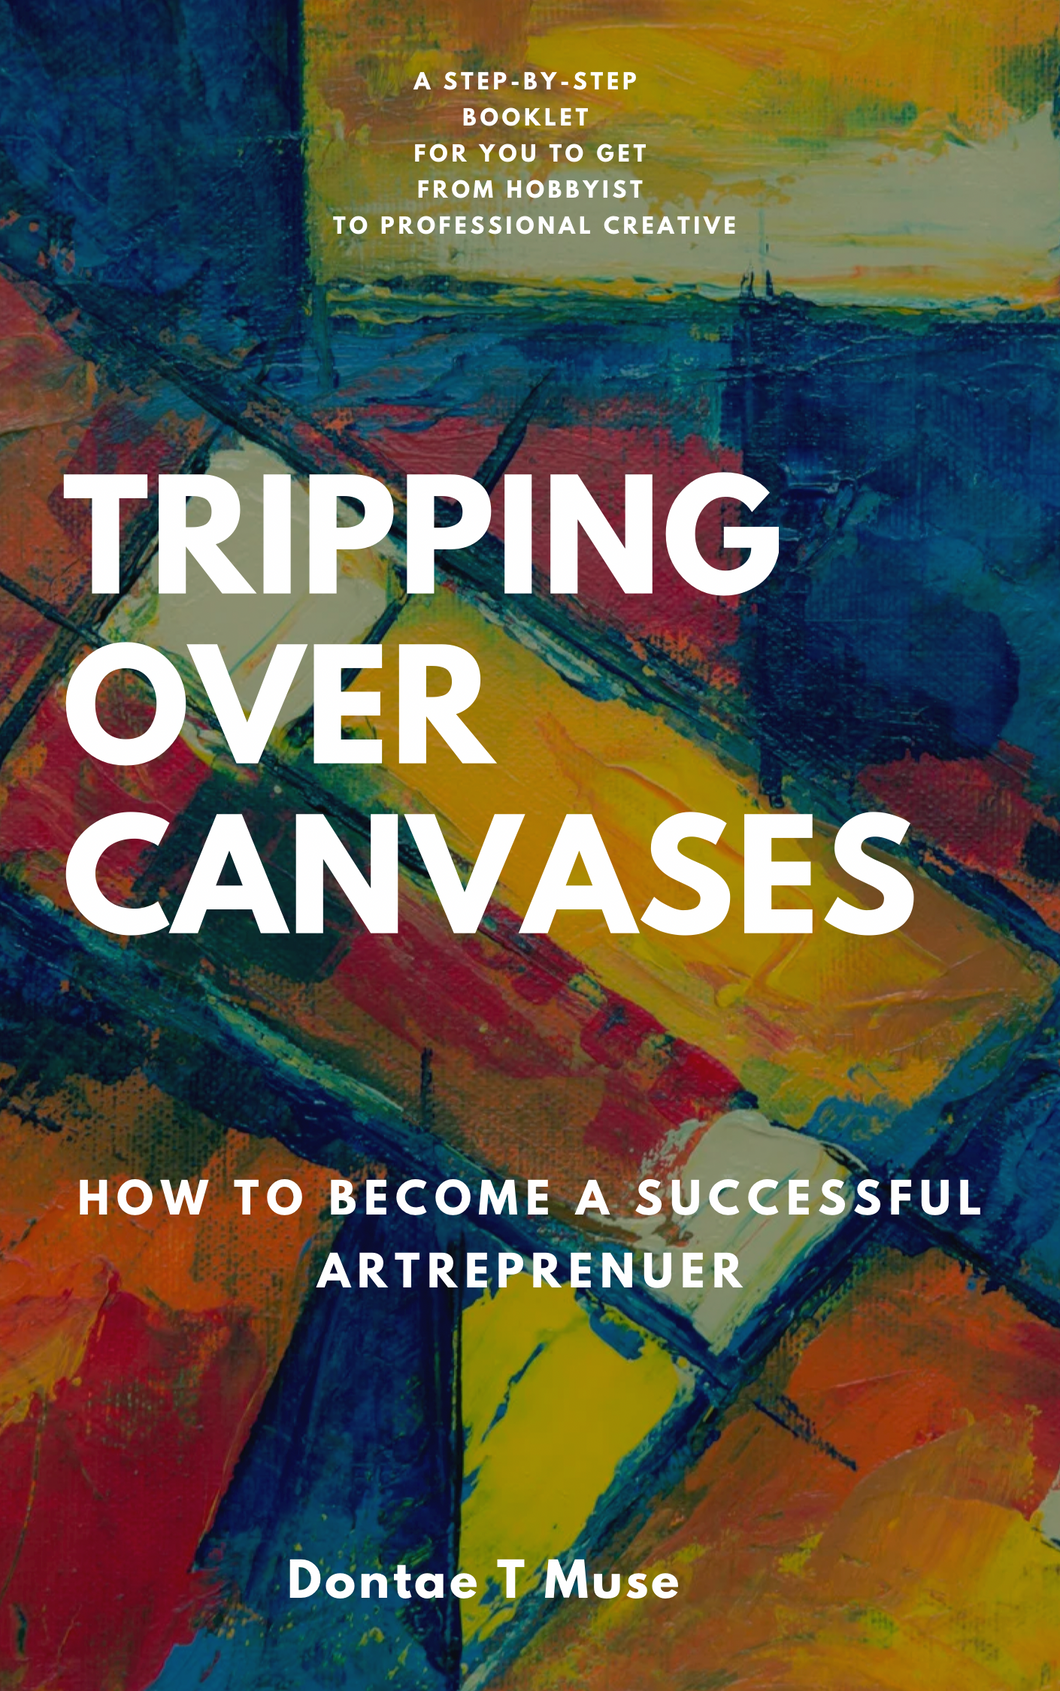 Tripping Over Canvases: How To Become A Successful Artrepreneur